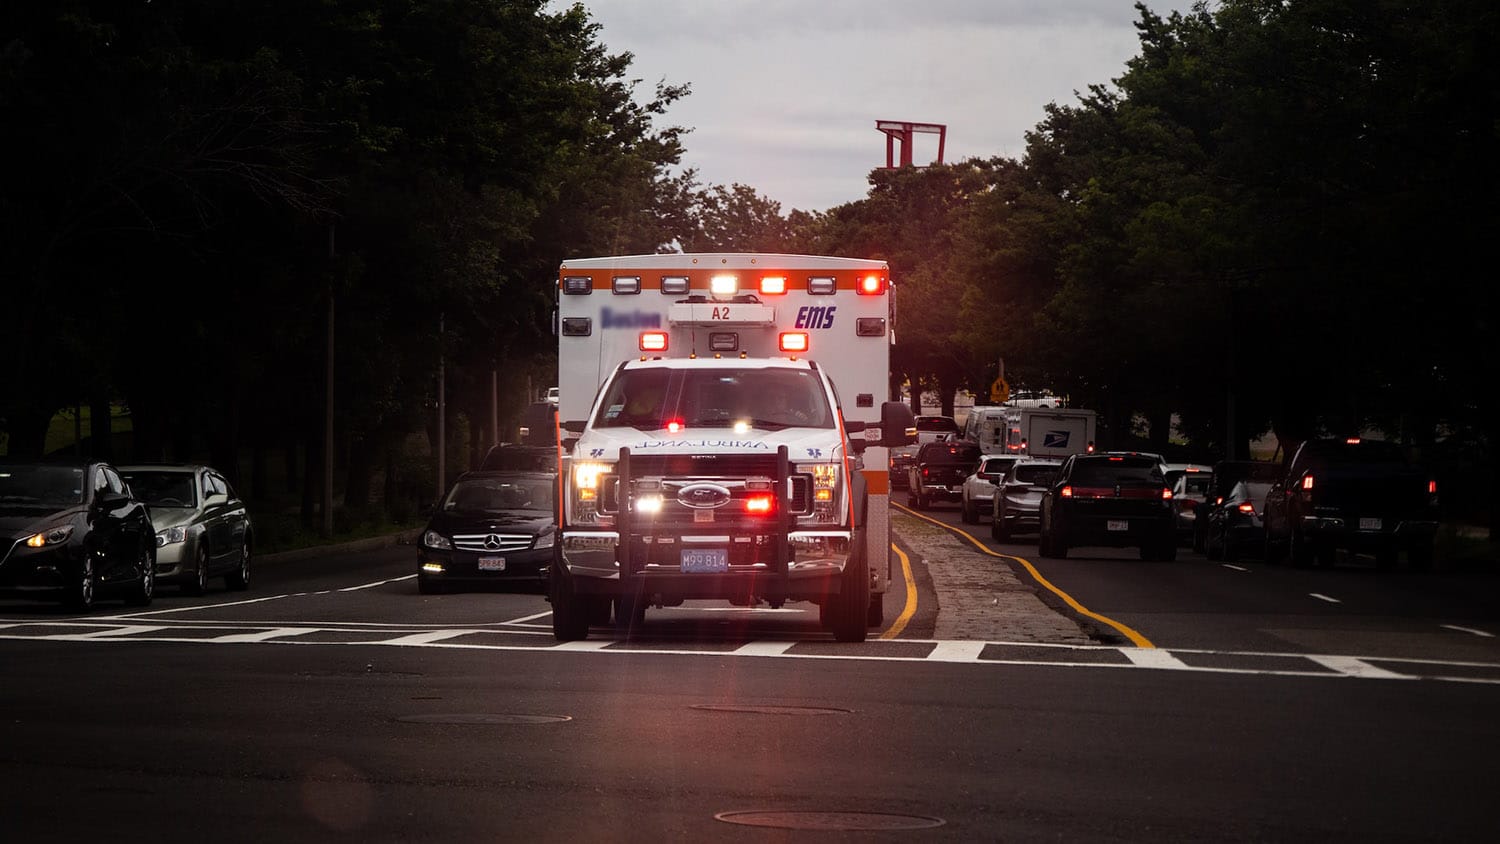 an ambulance passes through an intersection with lights flashing